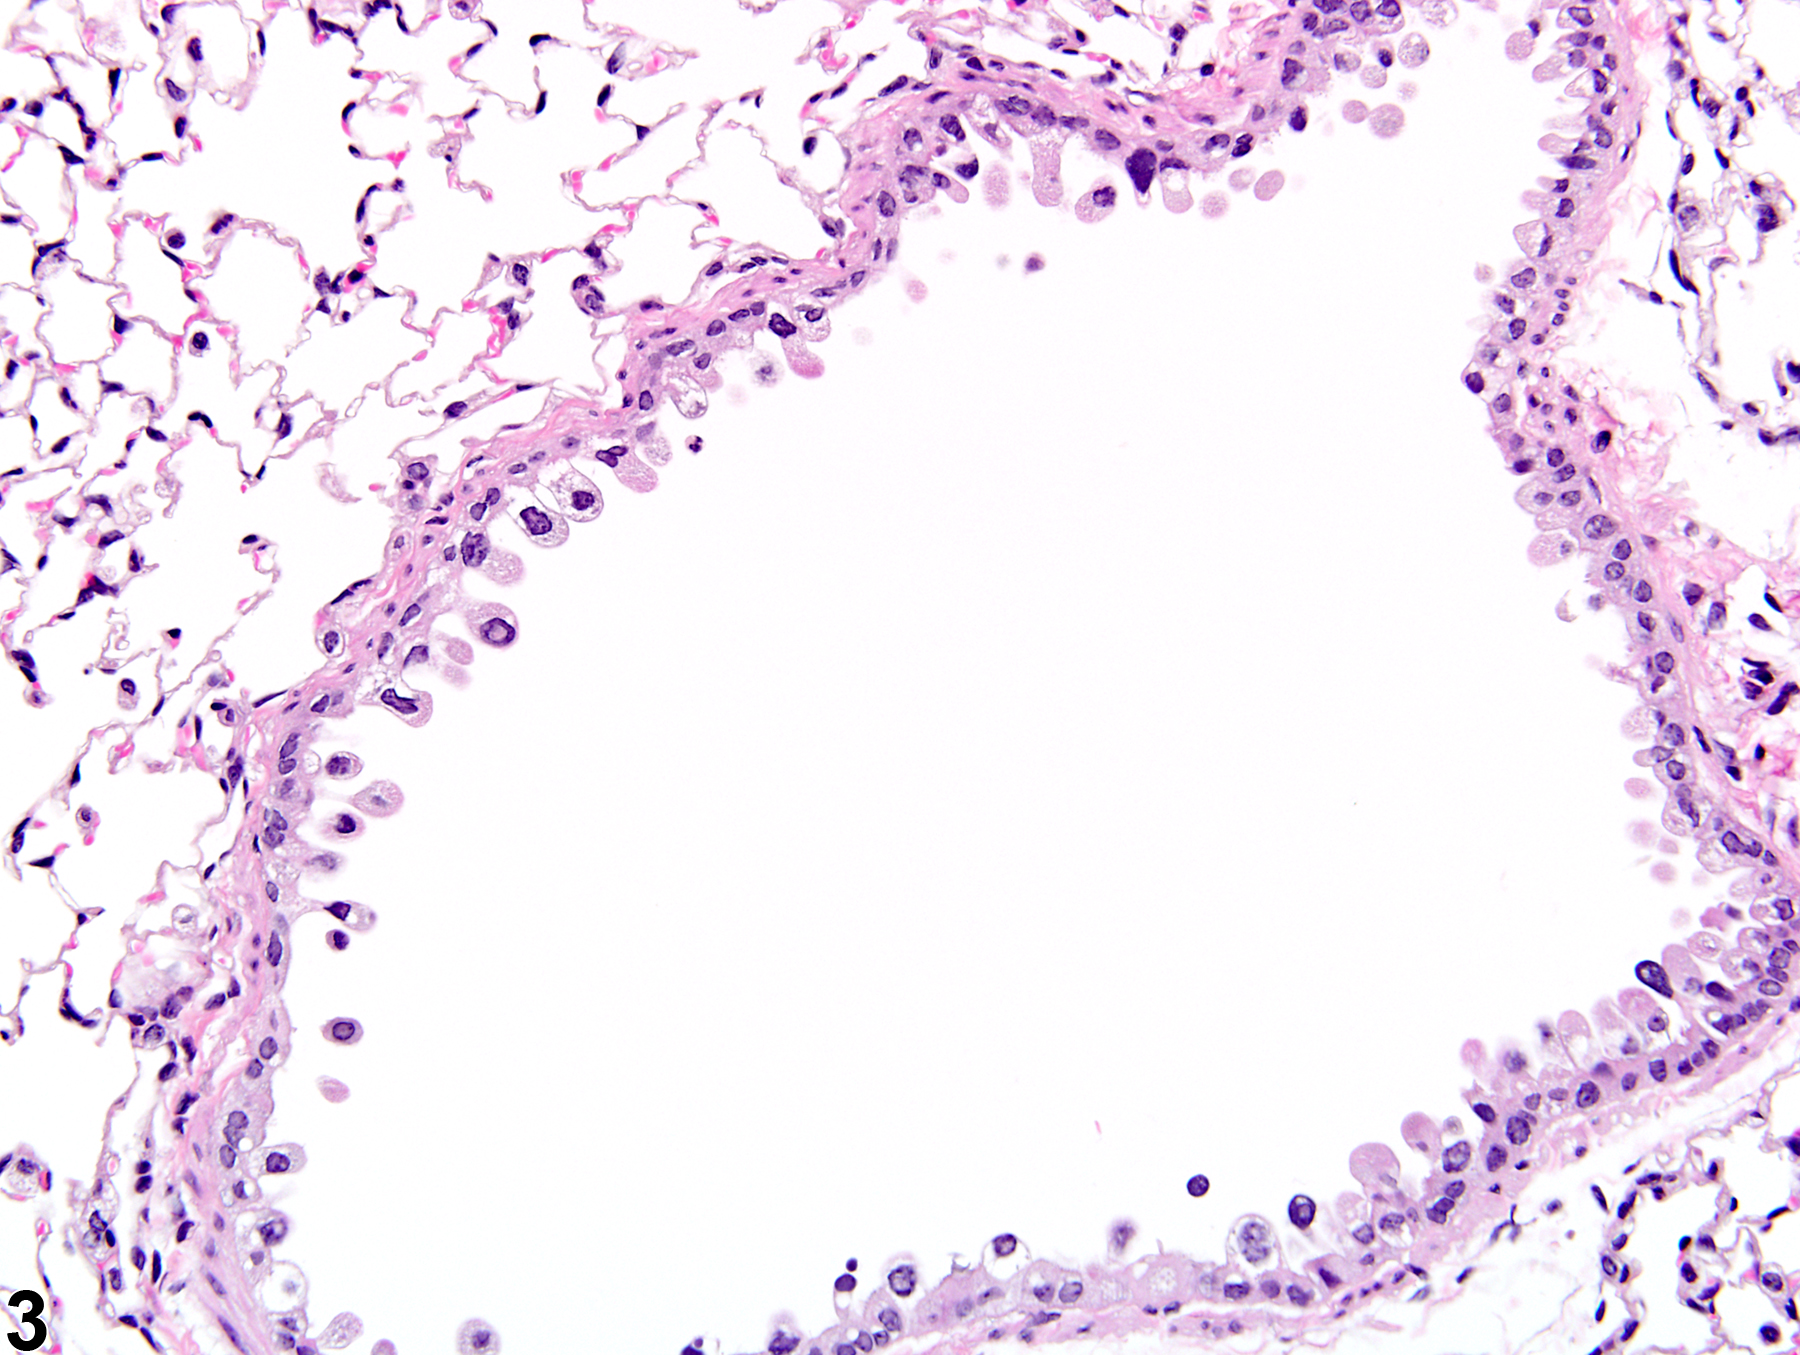 Image of epithelial degeneration in the lung from a male B6C3F1/N mouse in a subchronic study